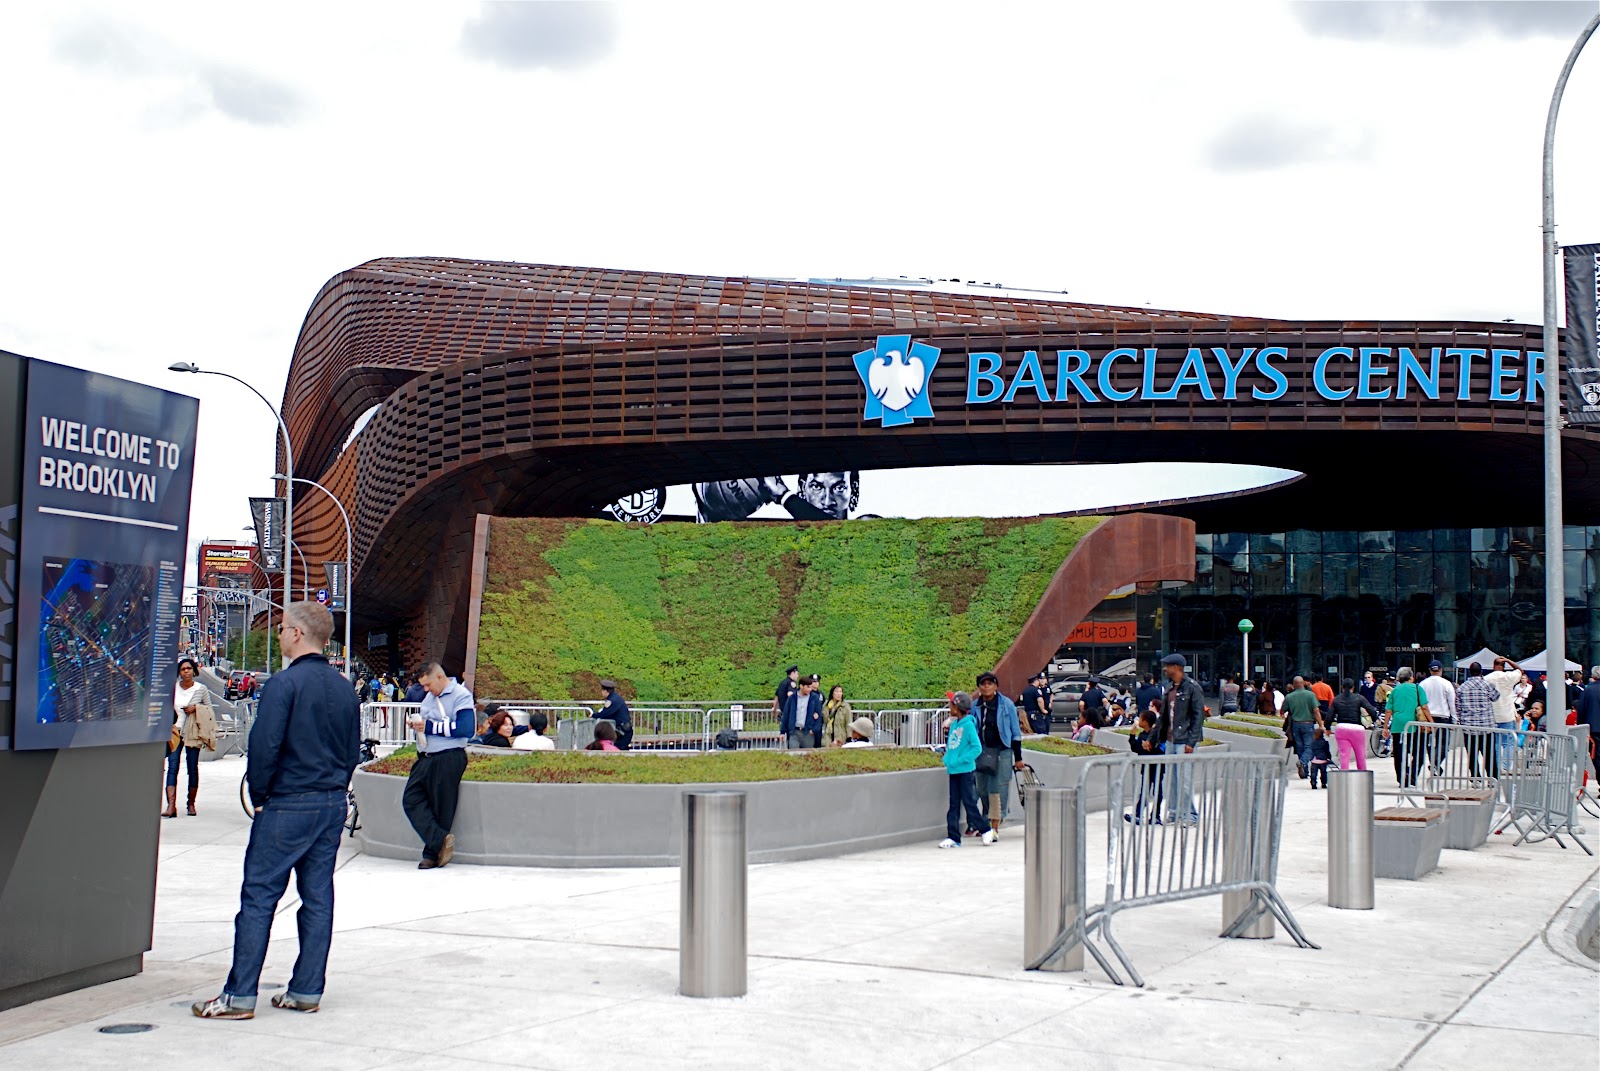 Official Barclays Center Time-Lapse 